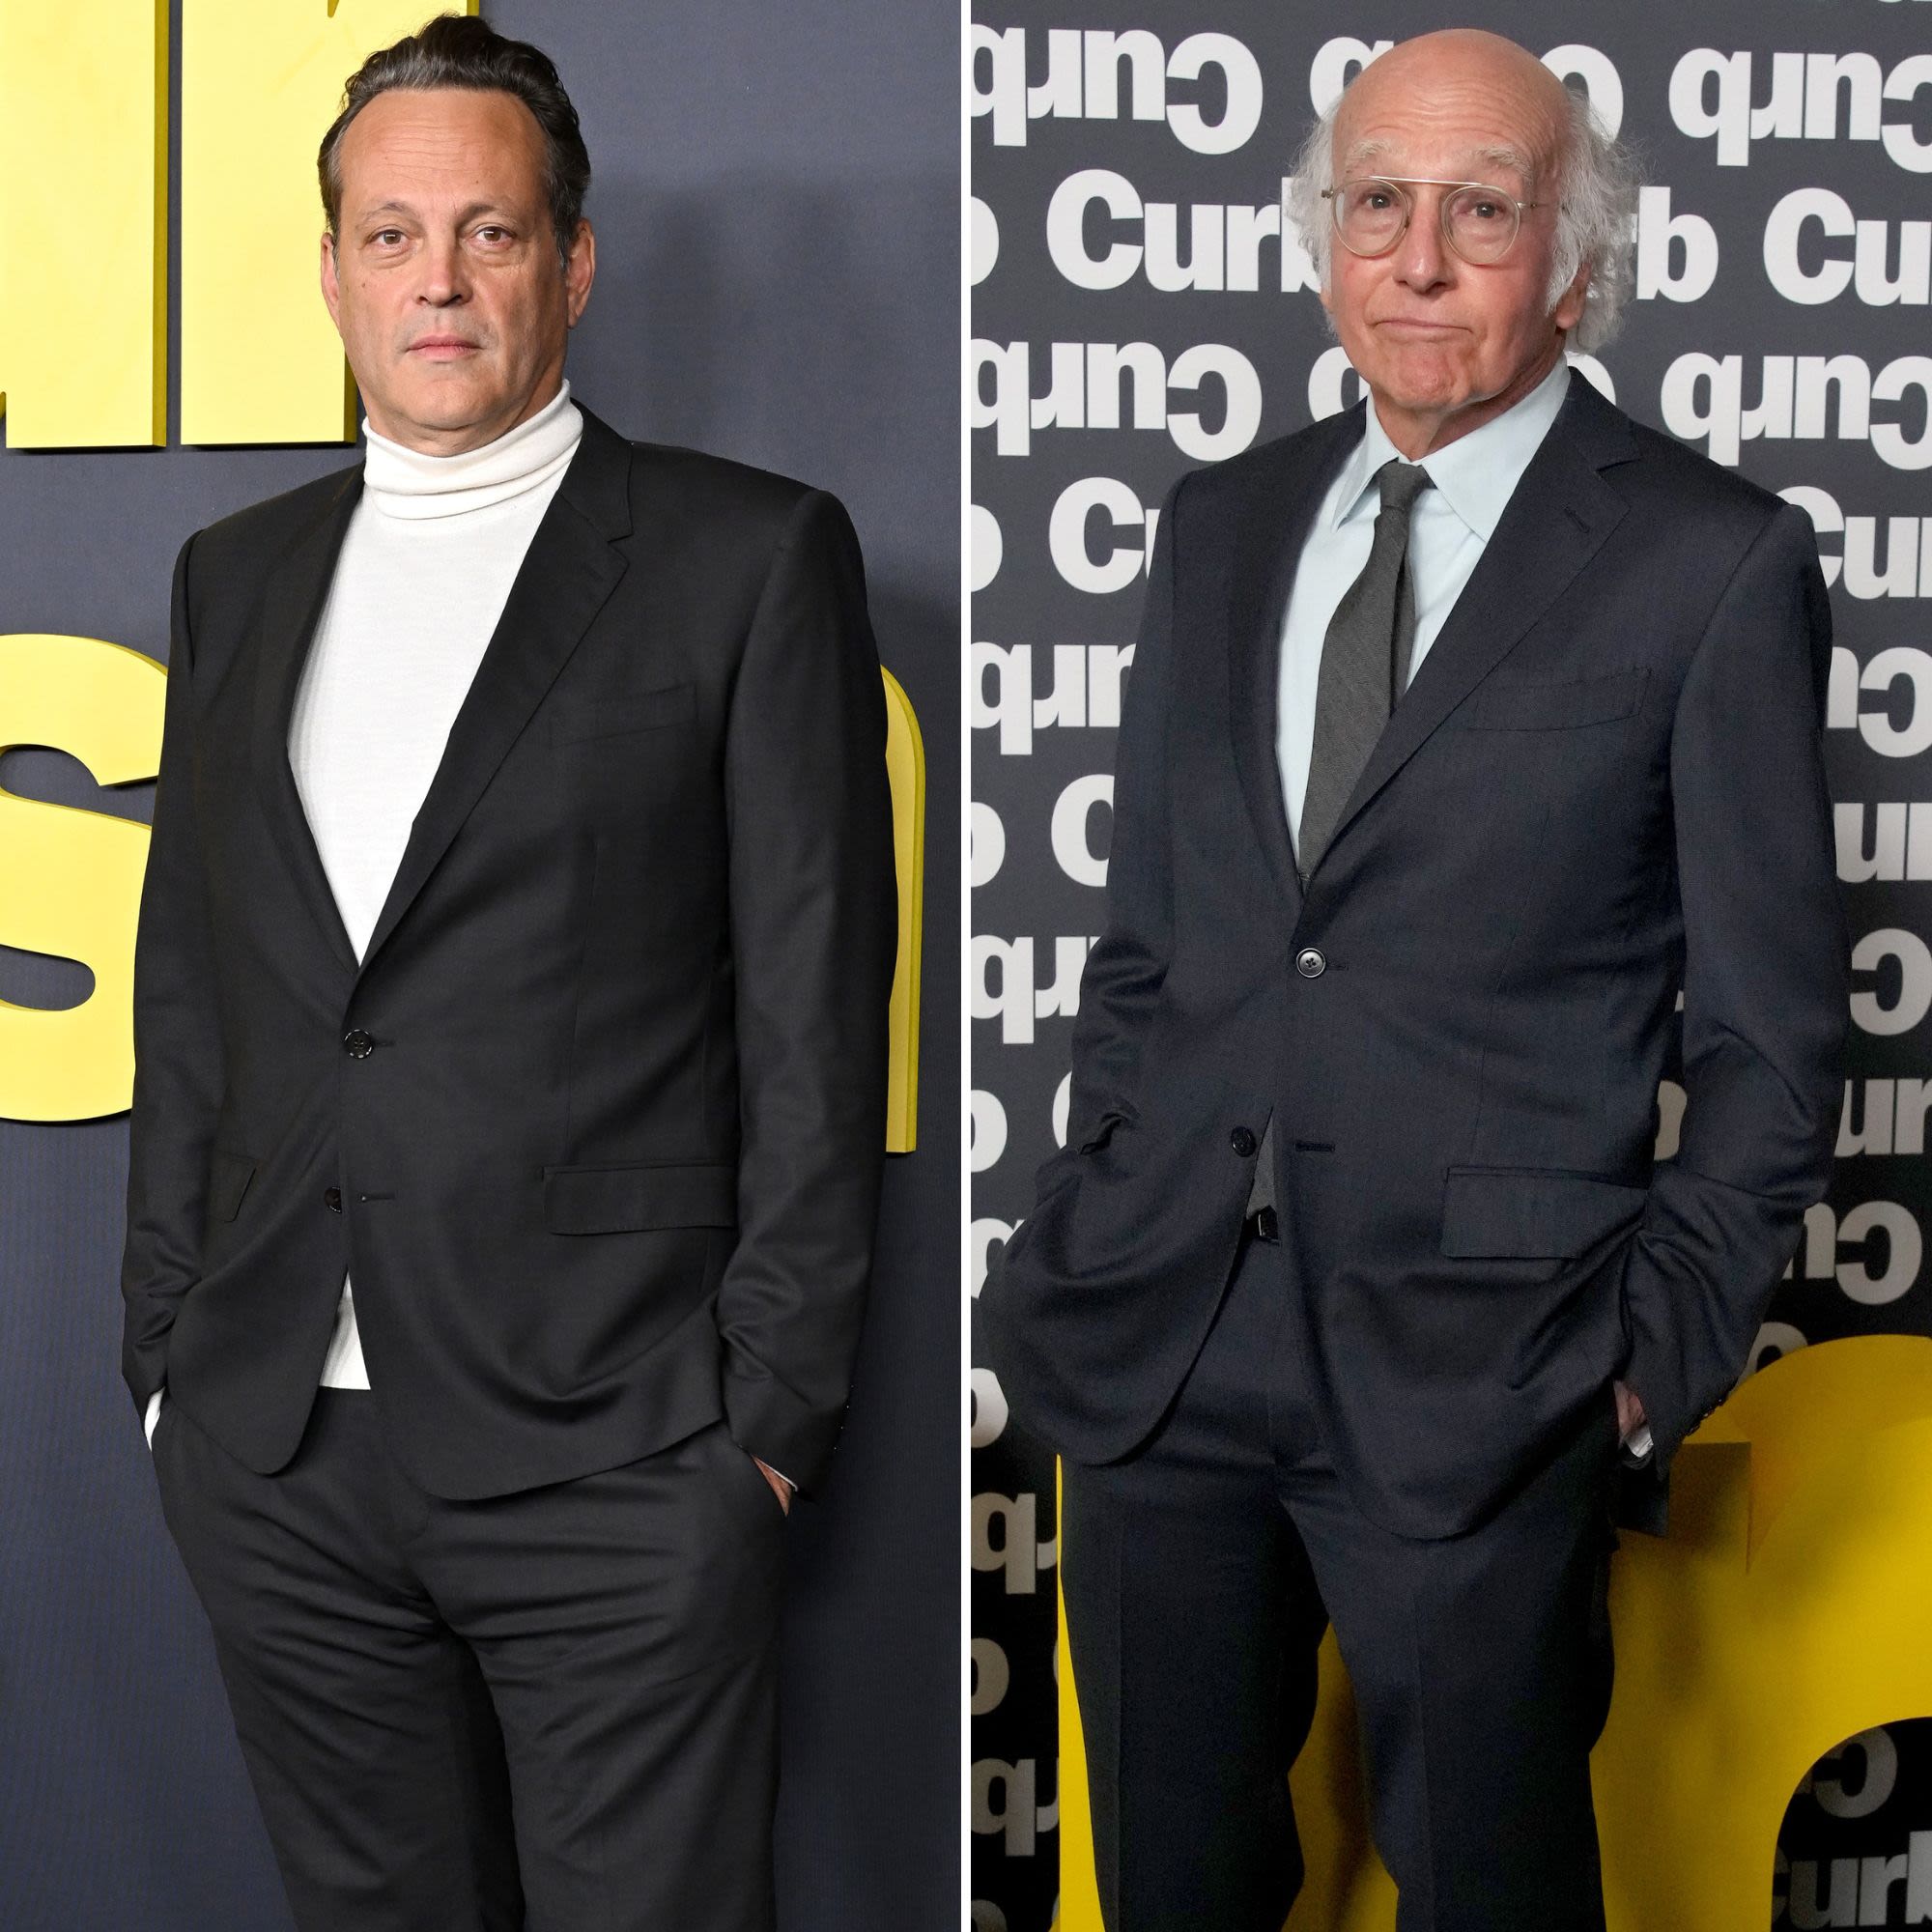 Will Vince Vaughn Get a ‘Curb Your Enthusiasm’ Spinoff? It’s Driving Larry David ‘a Little Crazy’